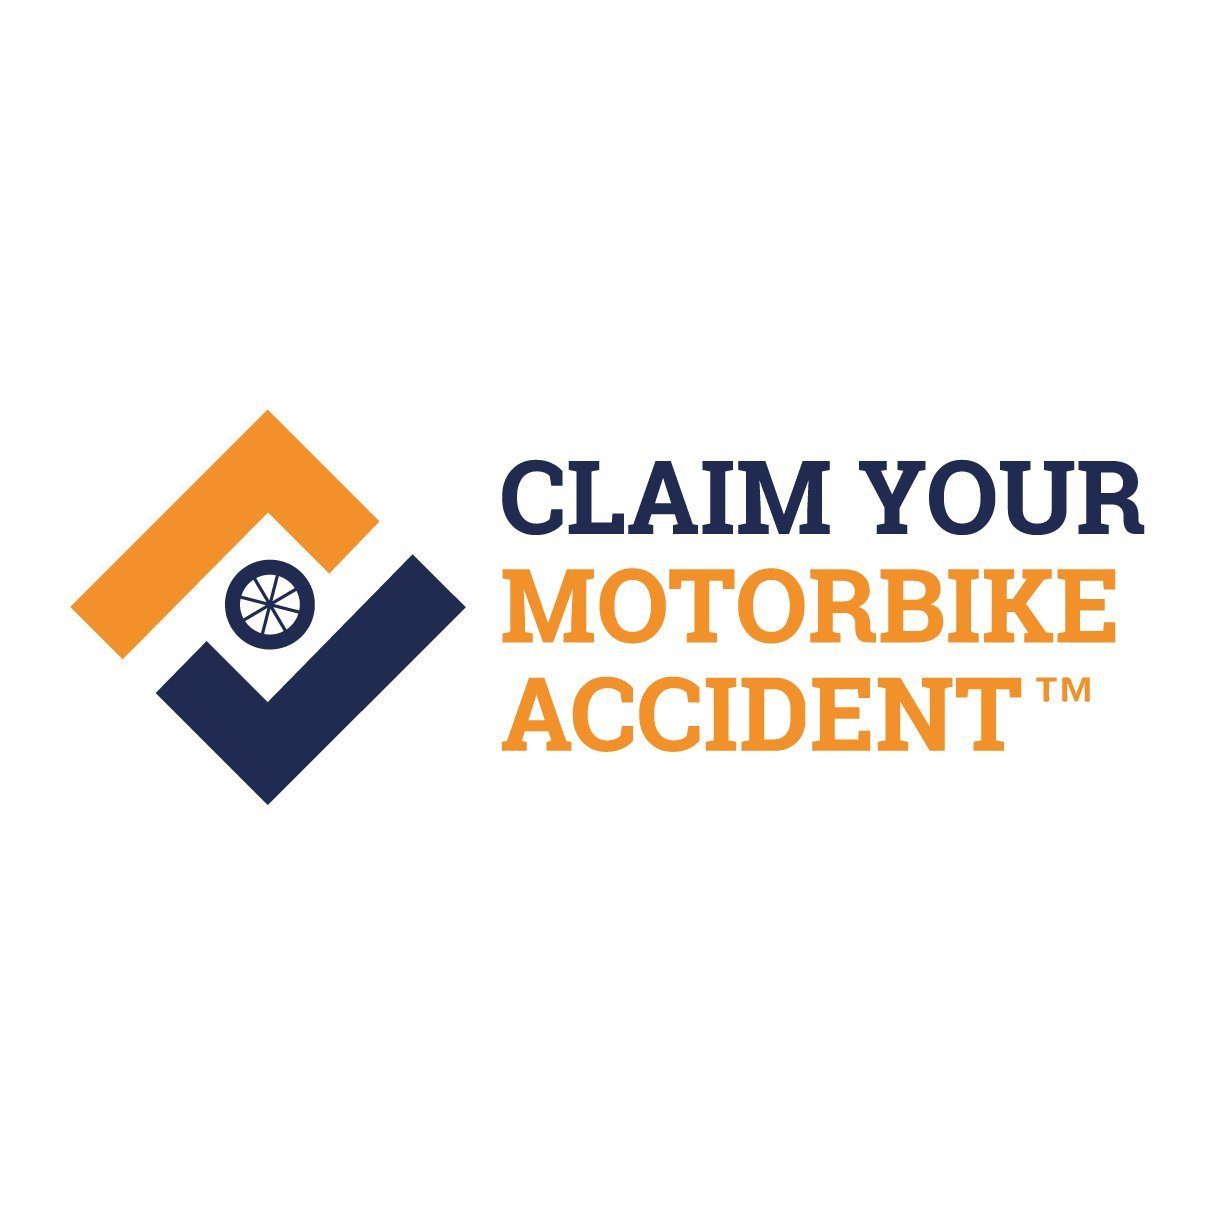 Claim Your Motorbike Accident specialise in supporting and helping riders who have had serious or lifechanging injuries as a result of a motorbike accident.